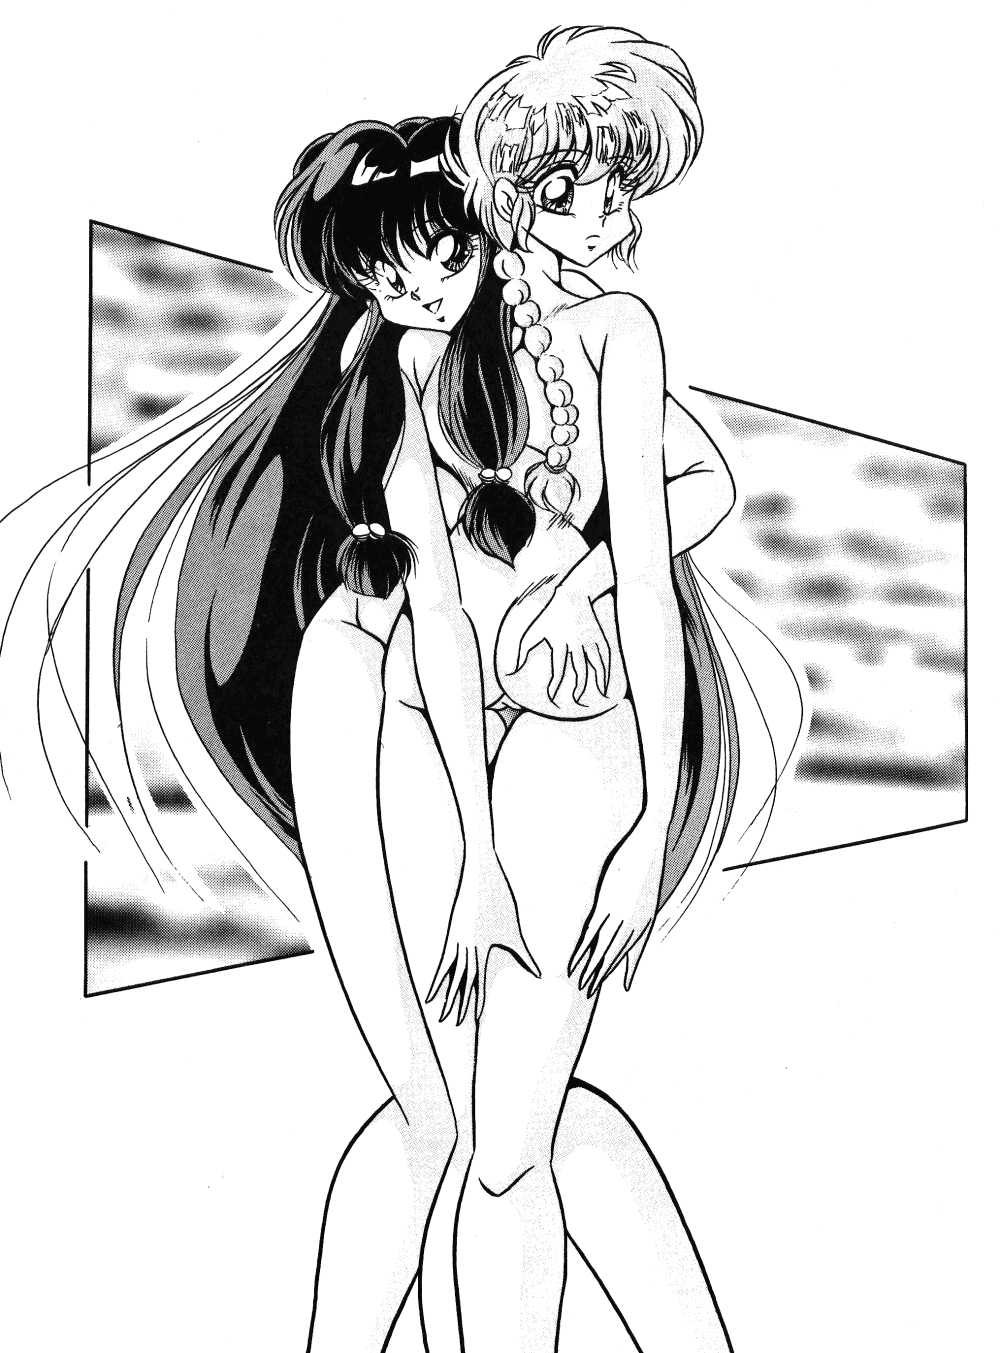 [C-Company] C-COMPANY SPECIAL STAGE 15 (Darkstalkers, Ranma 1/2) page 6 full